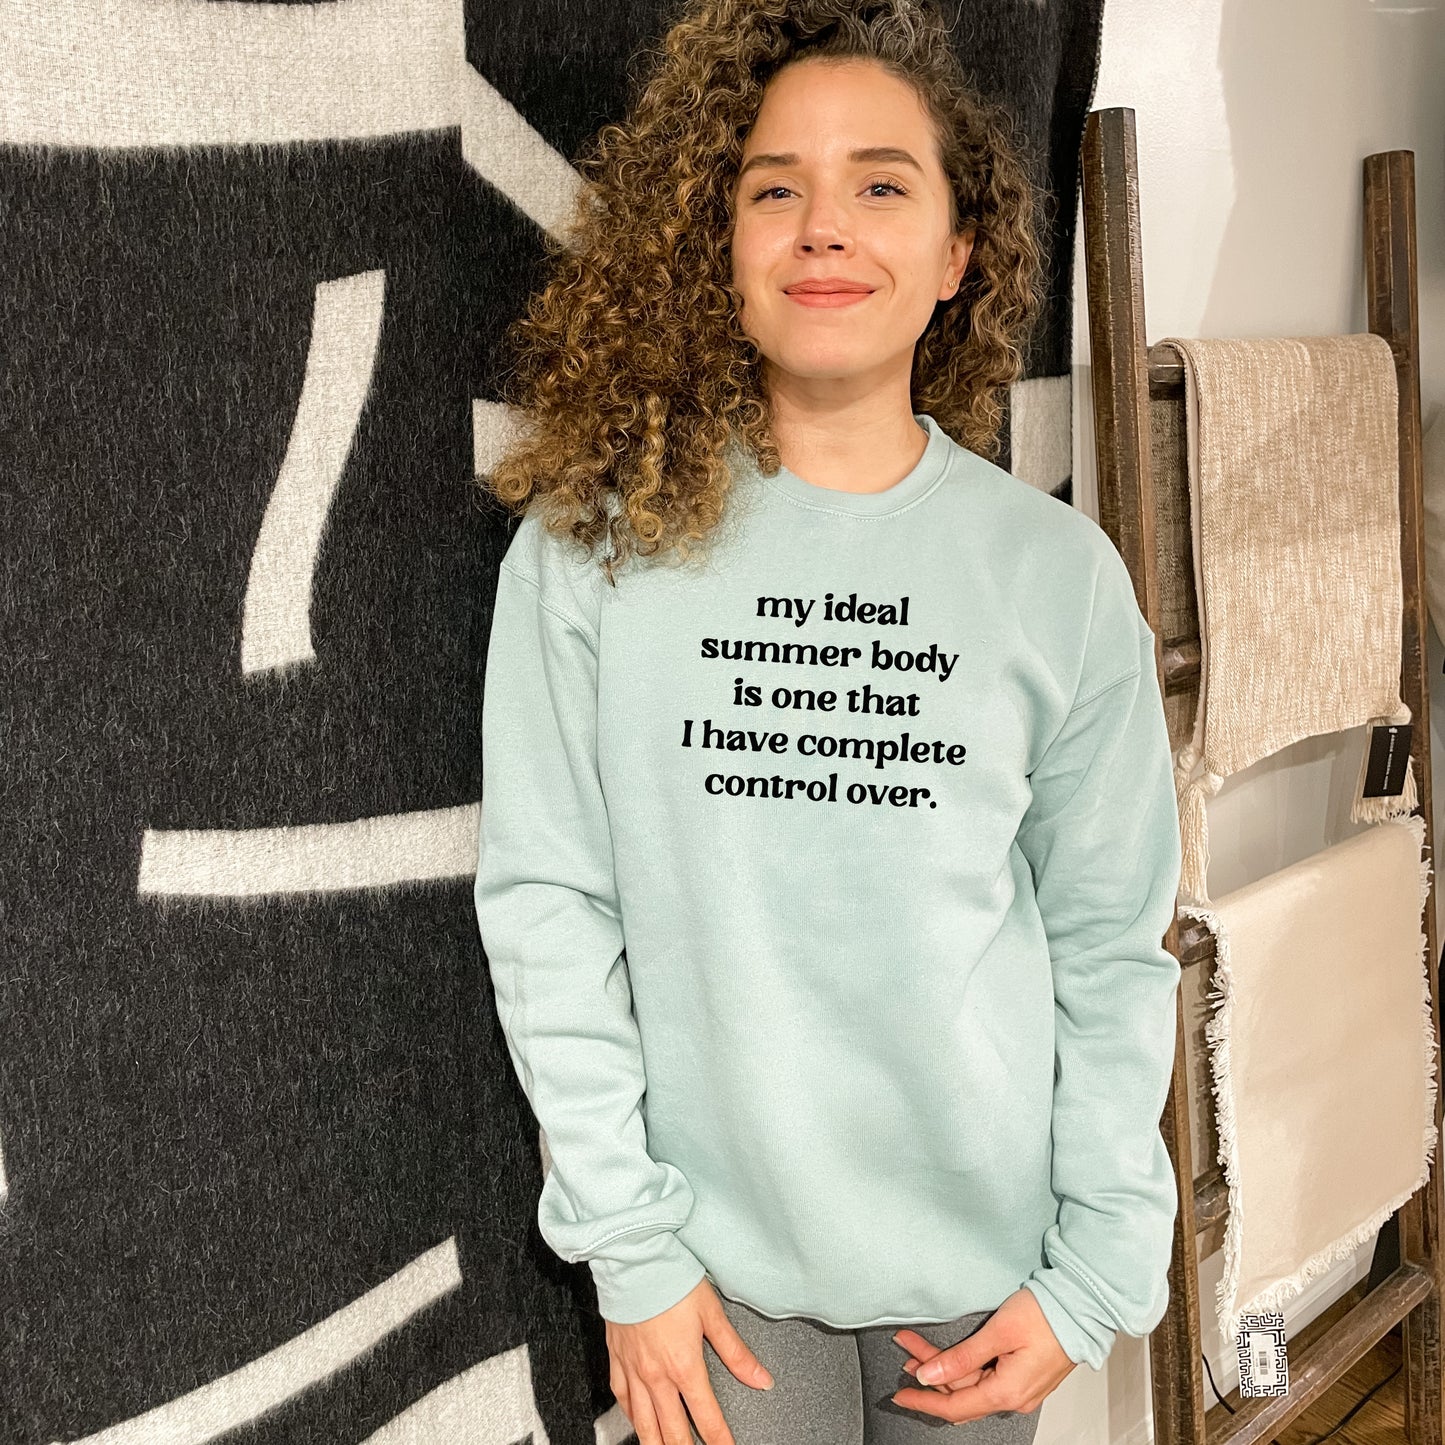 My Ideal Summer Body Is One I Have Complete Control Over - Unisex Sweatshirt - Heather Gray or Dusty Blue